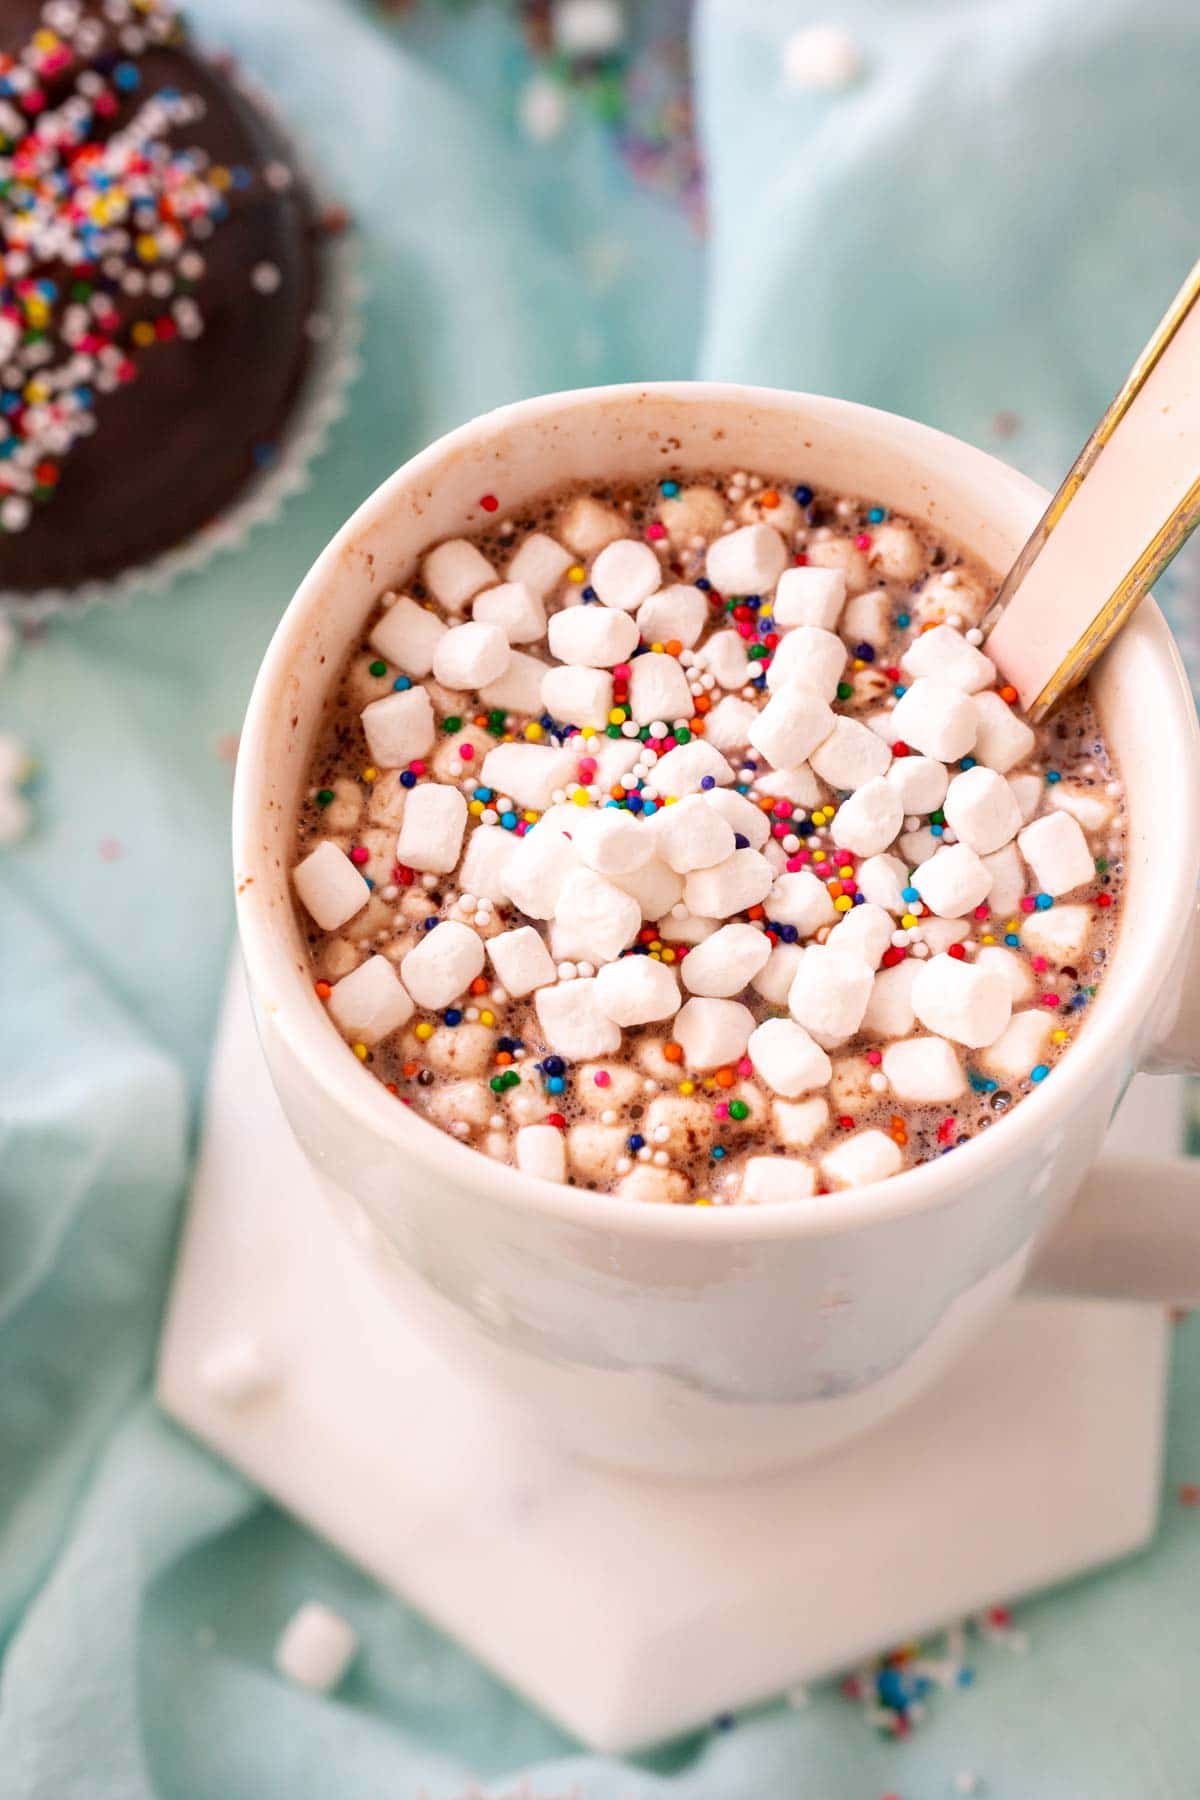 Glass of hot chocolate with marshmallows and sprinkles